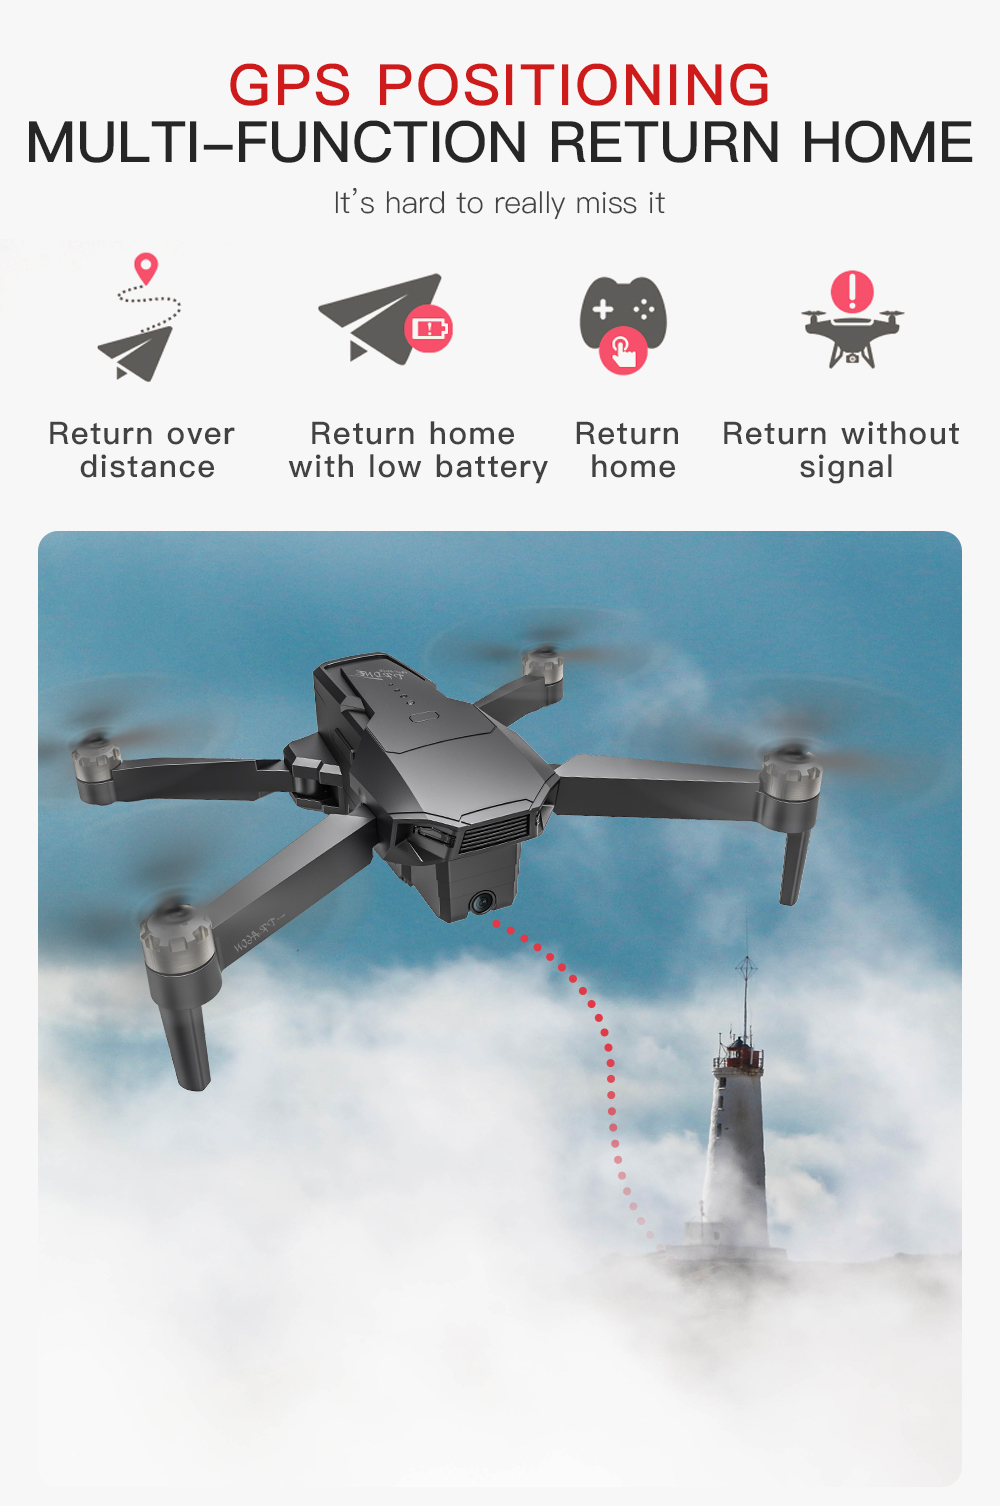 KF107-GPS-5G-WiFi-12KM-FPV-with-4K-Servo-Camera-Optical-Flow-Positioning-Brushless-Foldable-RC-Drone-1740852-16